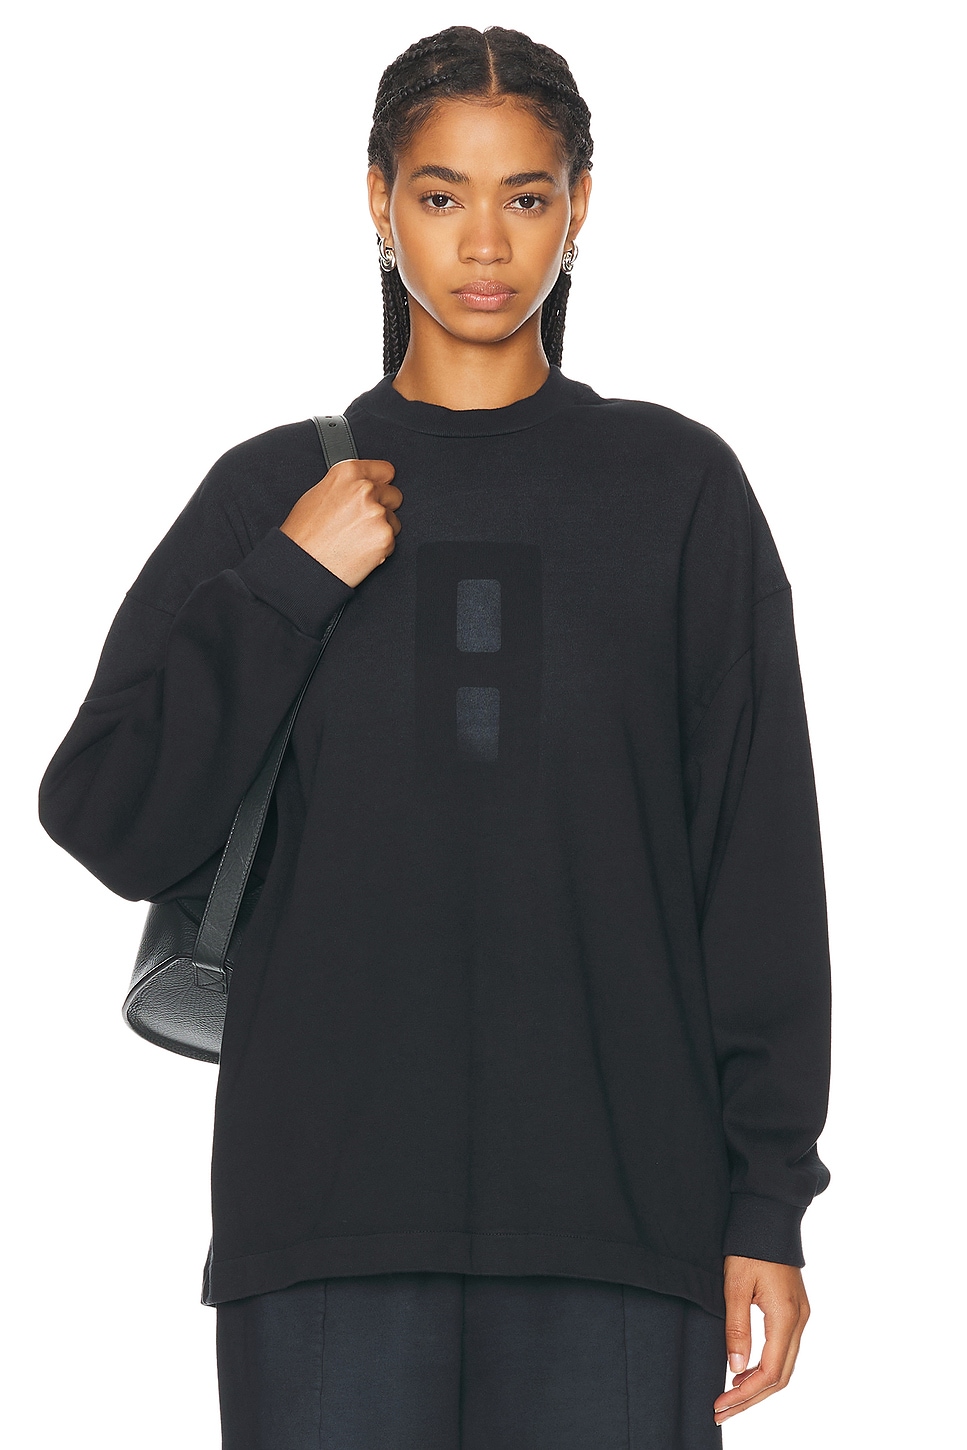 Image 1 of Fear of God Airbrush 8 Ls Tee in Black